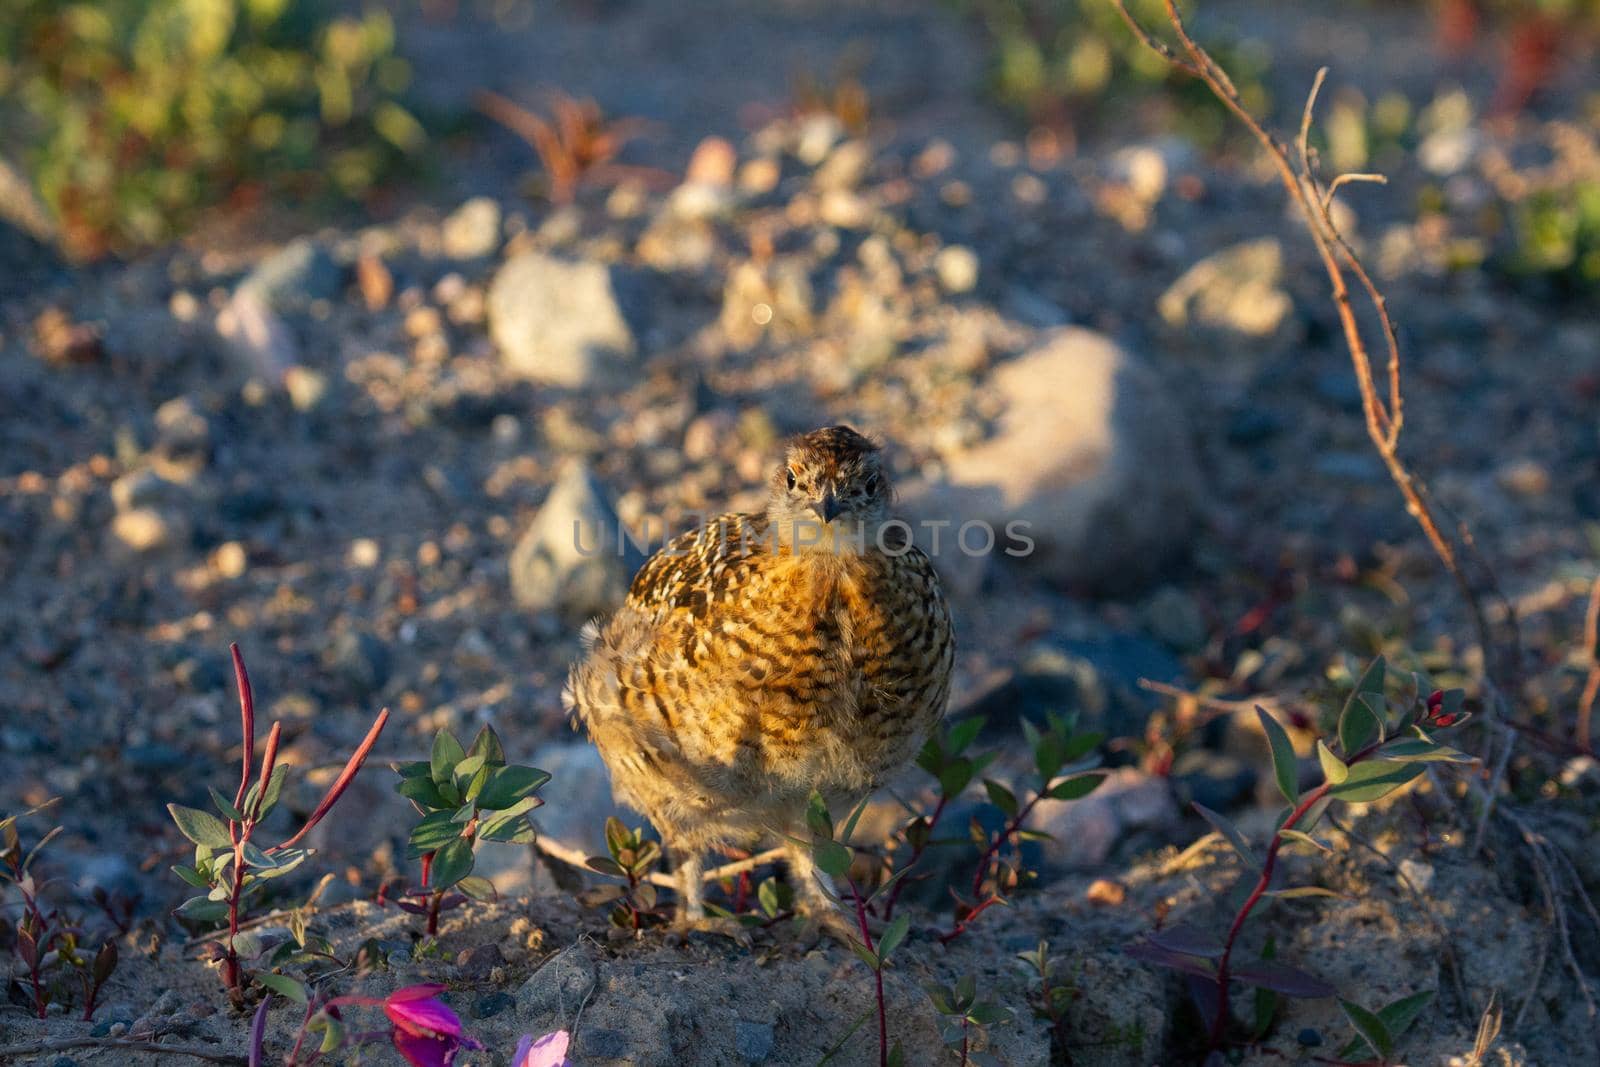 A young willow ptarmigan or grouse standing among rocks in Canada's arctic tundra by Granchinho